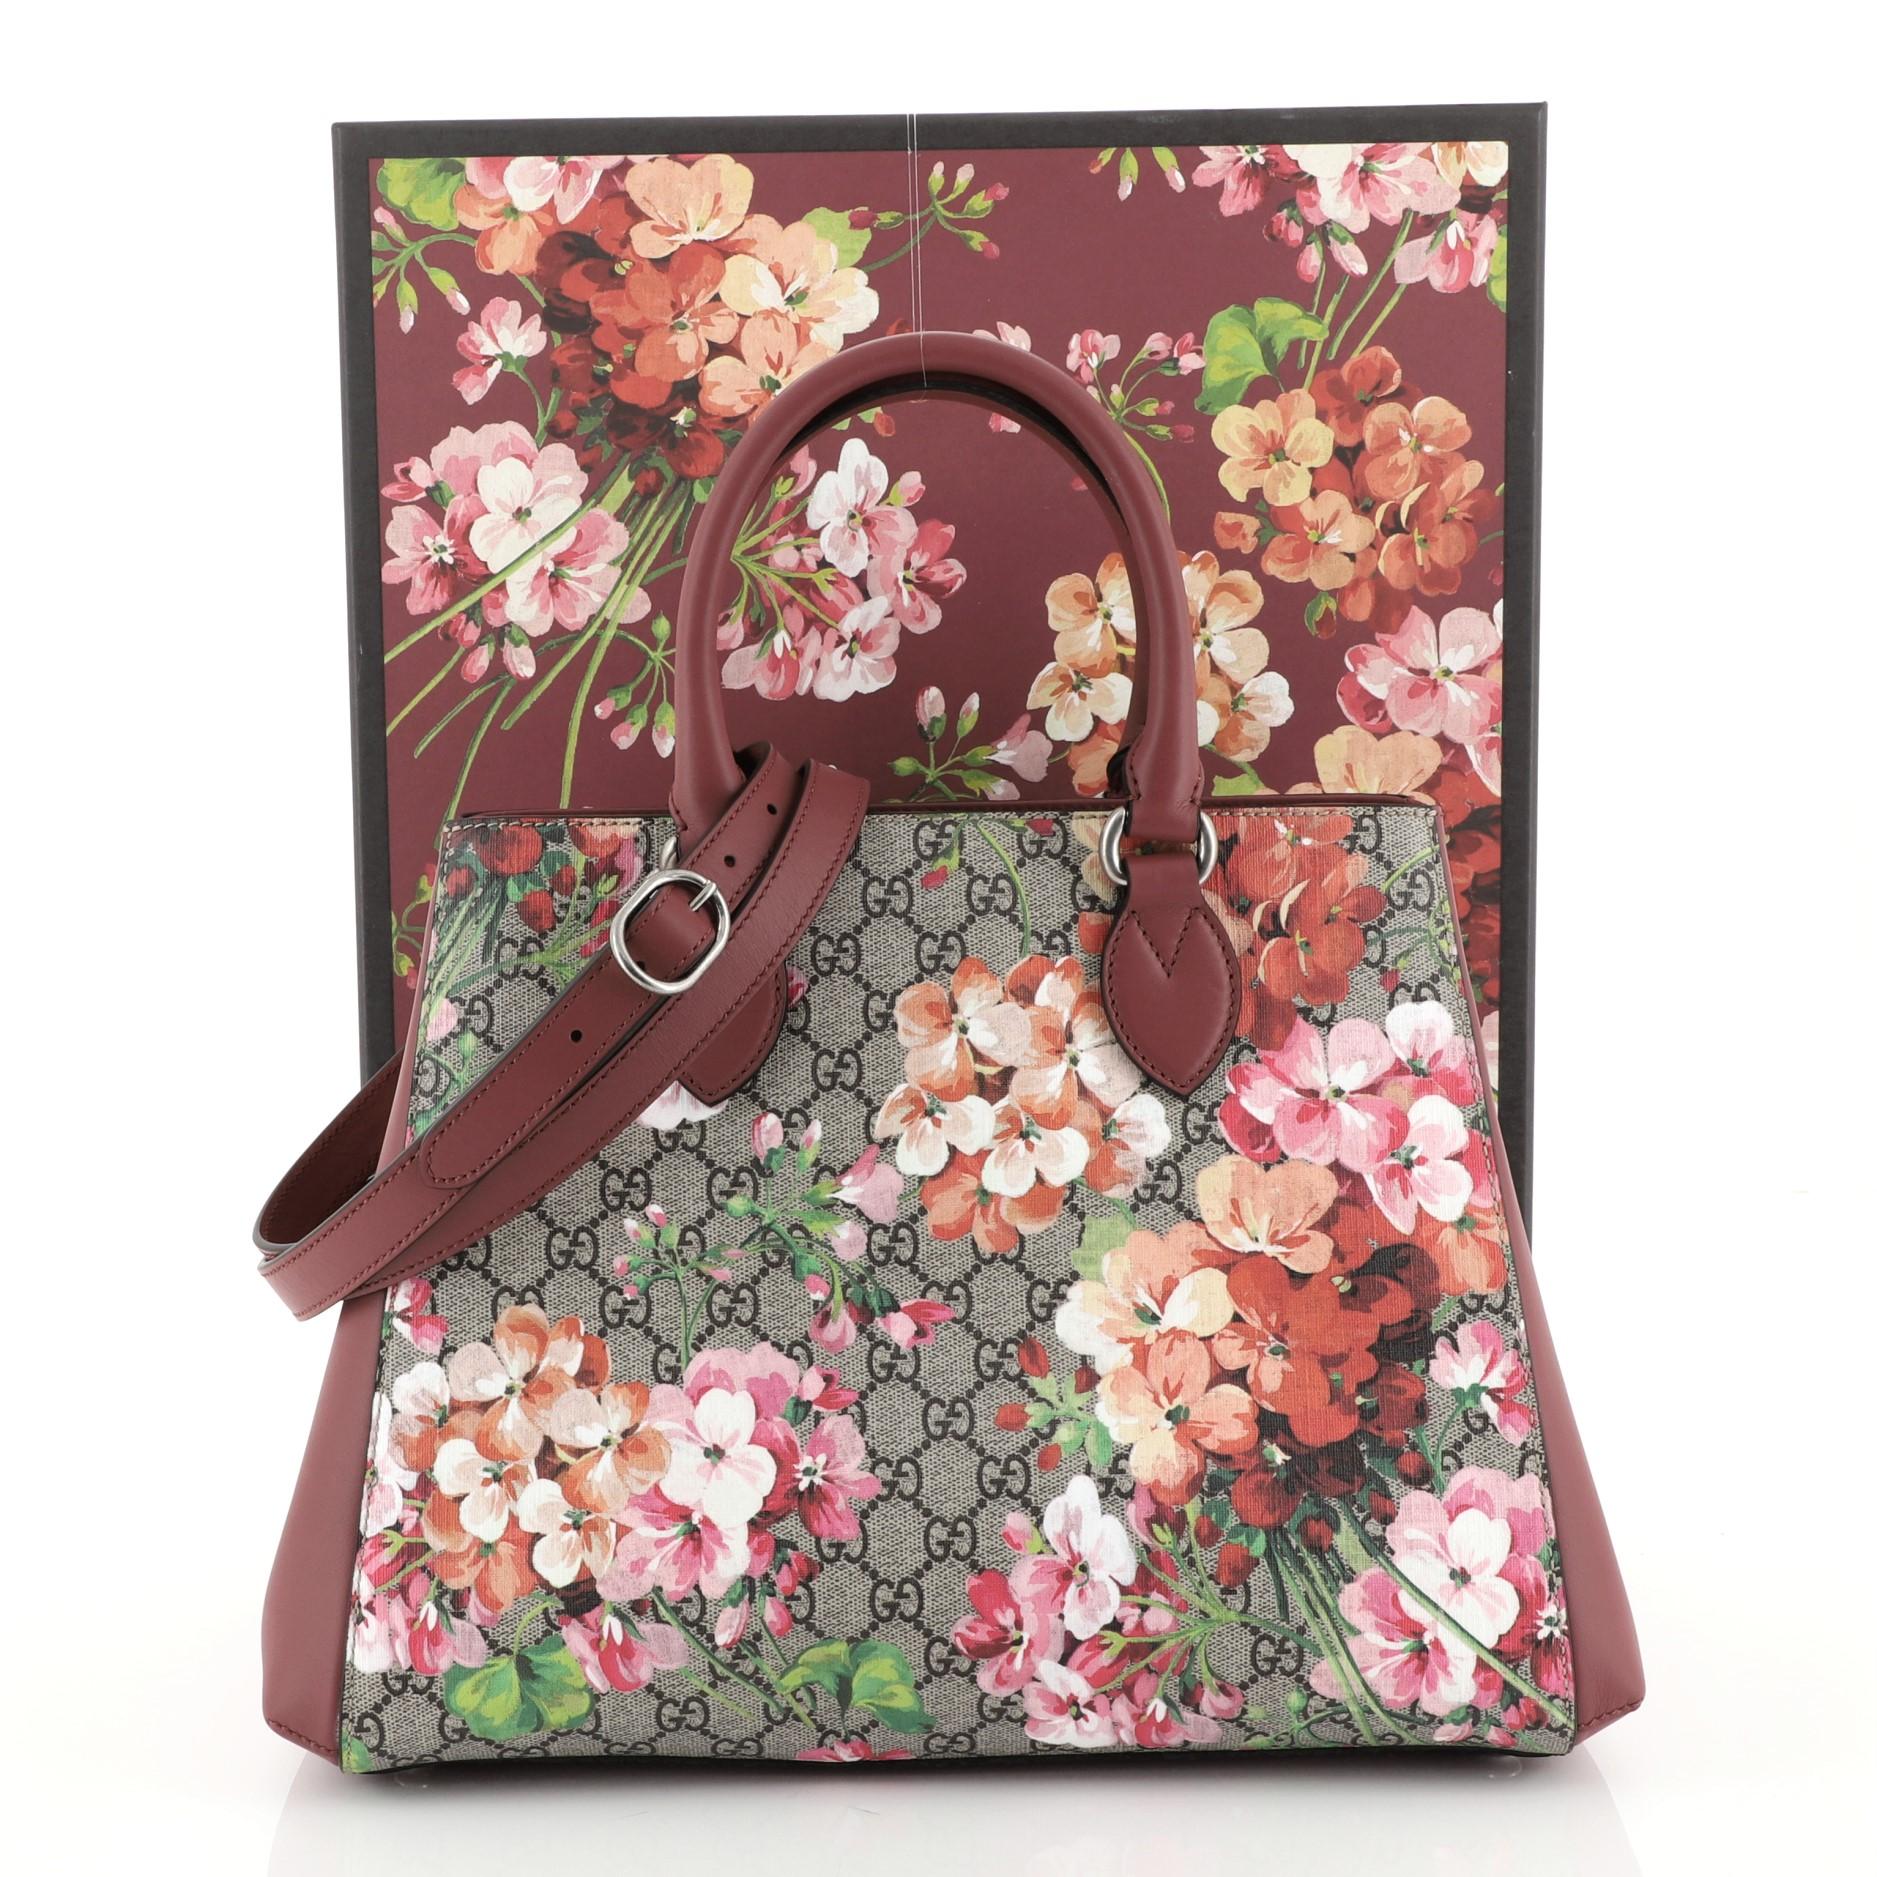 This Gucci Convertible Shopping Tote Blooms Print GG Coated Canvas Large, crafted from purple blooms print GG coated canvas, features dual rolled leather handles, leather side panels, and silver-tone hardware. It opens to a brown microfiber interior